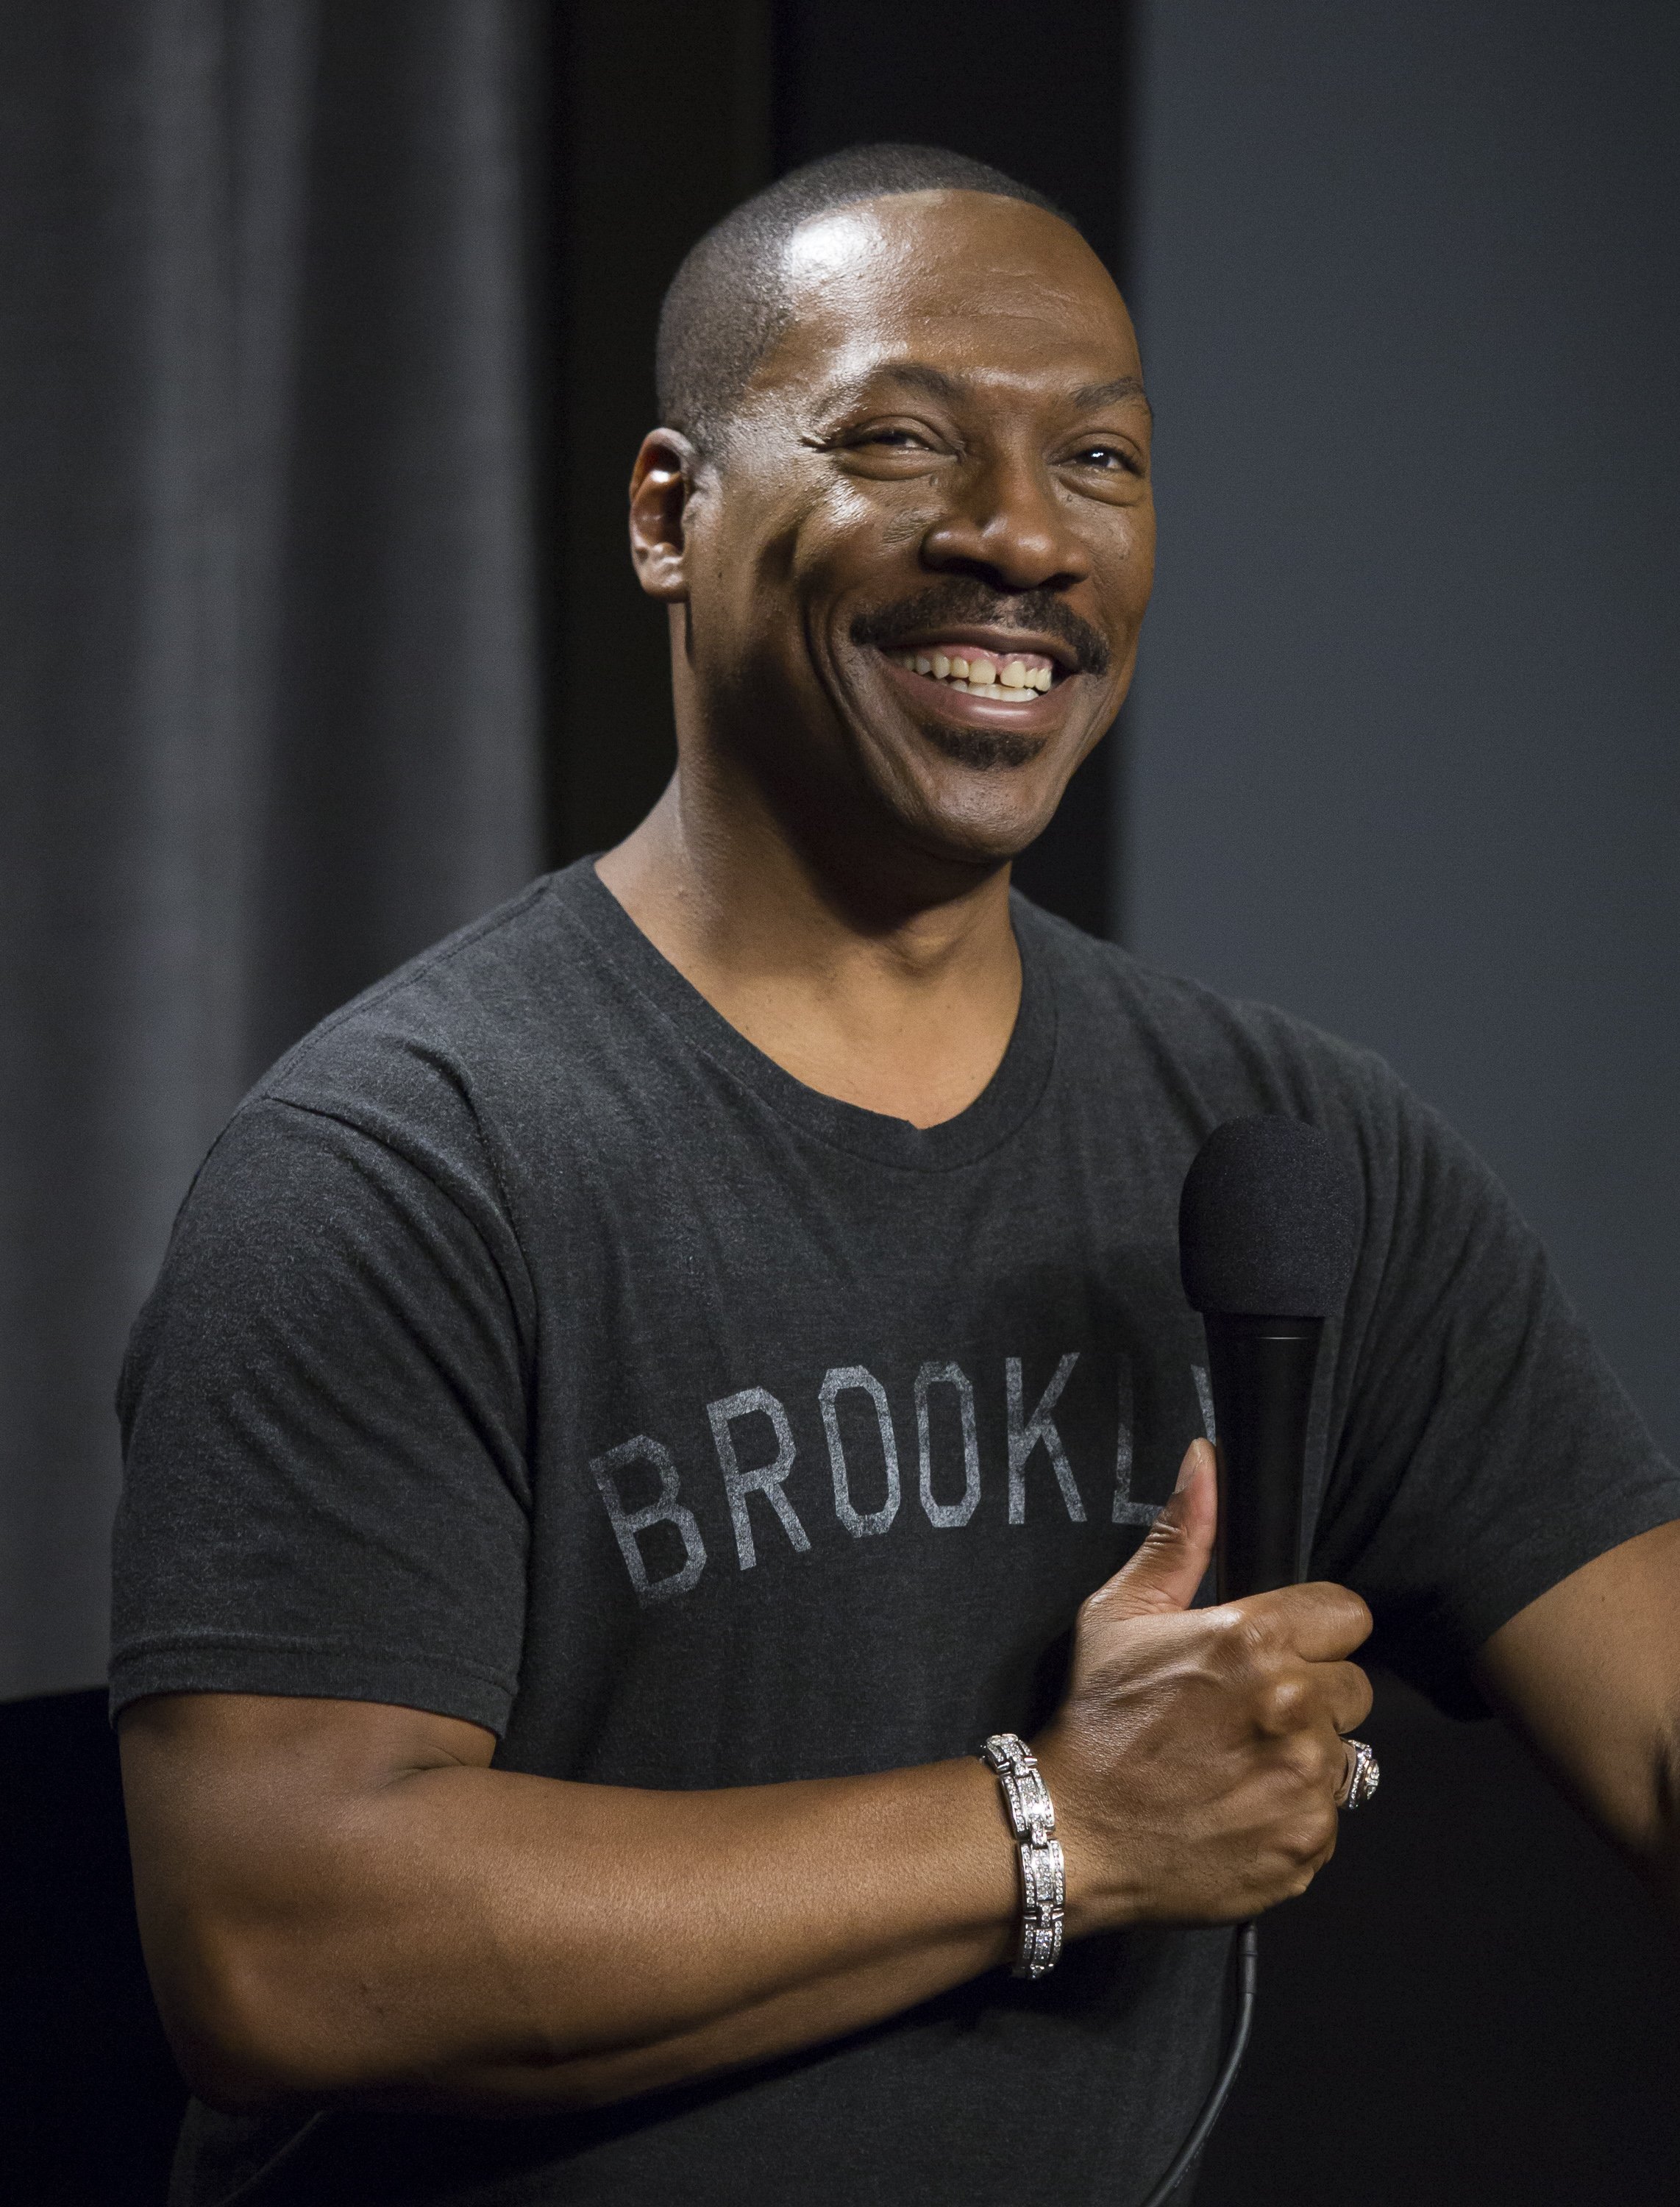 Eddie Murphy at SAG-AFTRA Foundation's Conversations with "Mr. Church" at SAG Foundation Actors Center on November 15, 2016 in Los Angeles, California | Photo: Getty Images